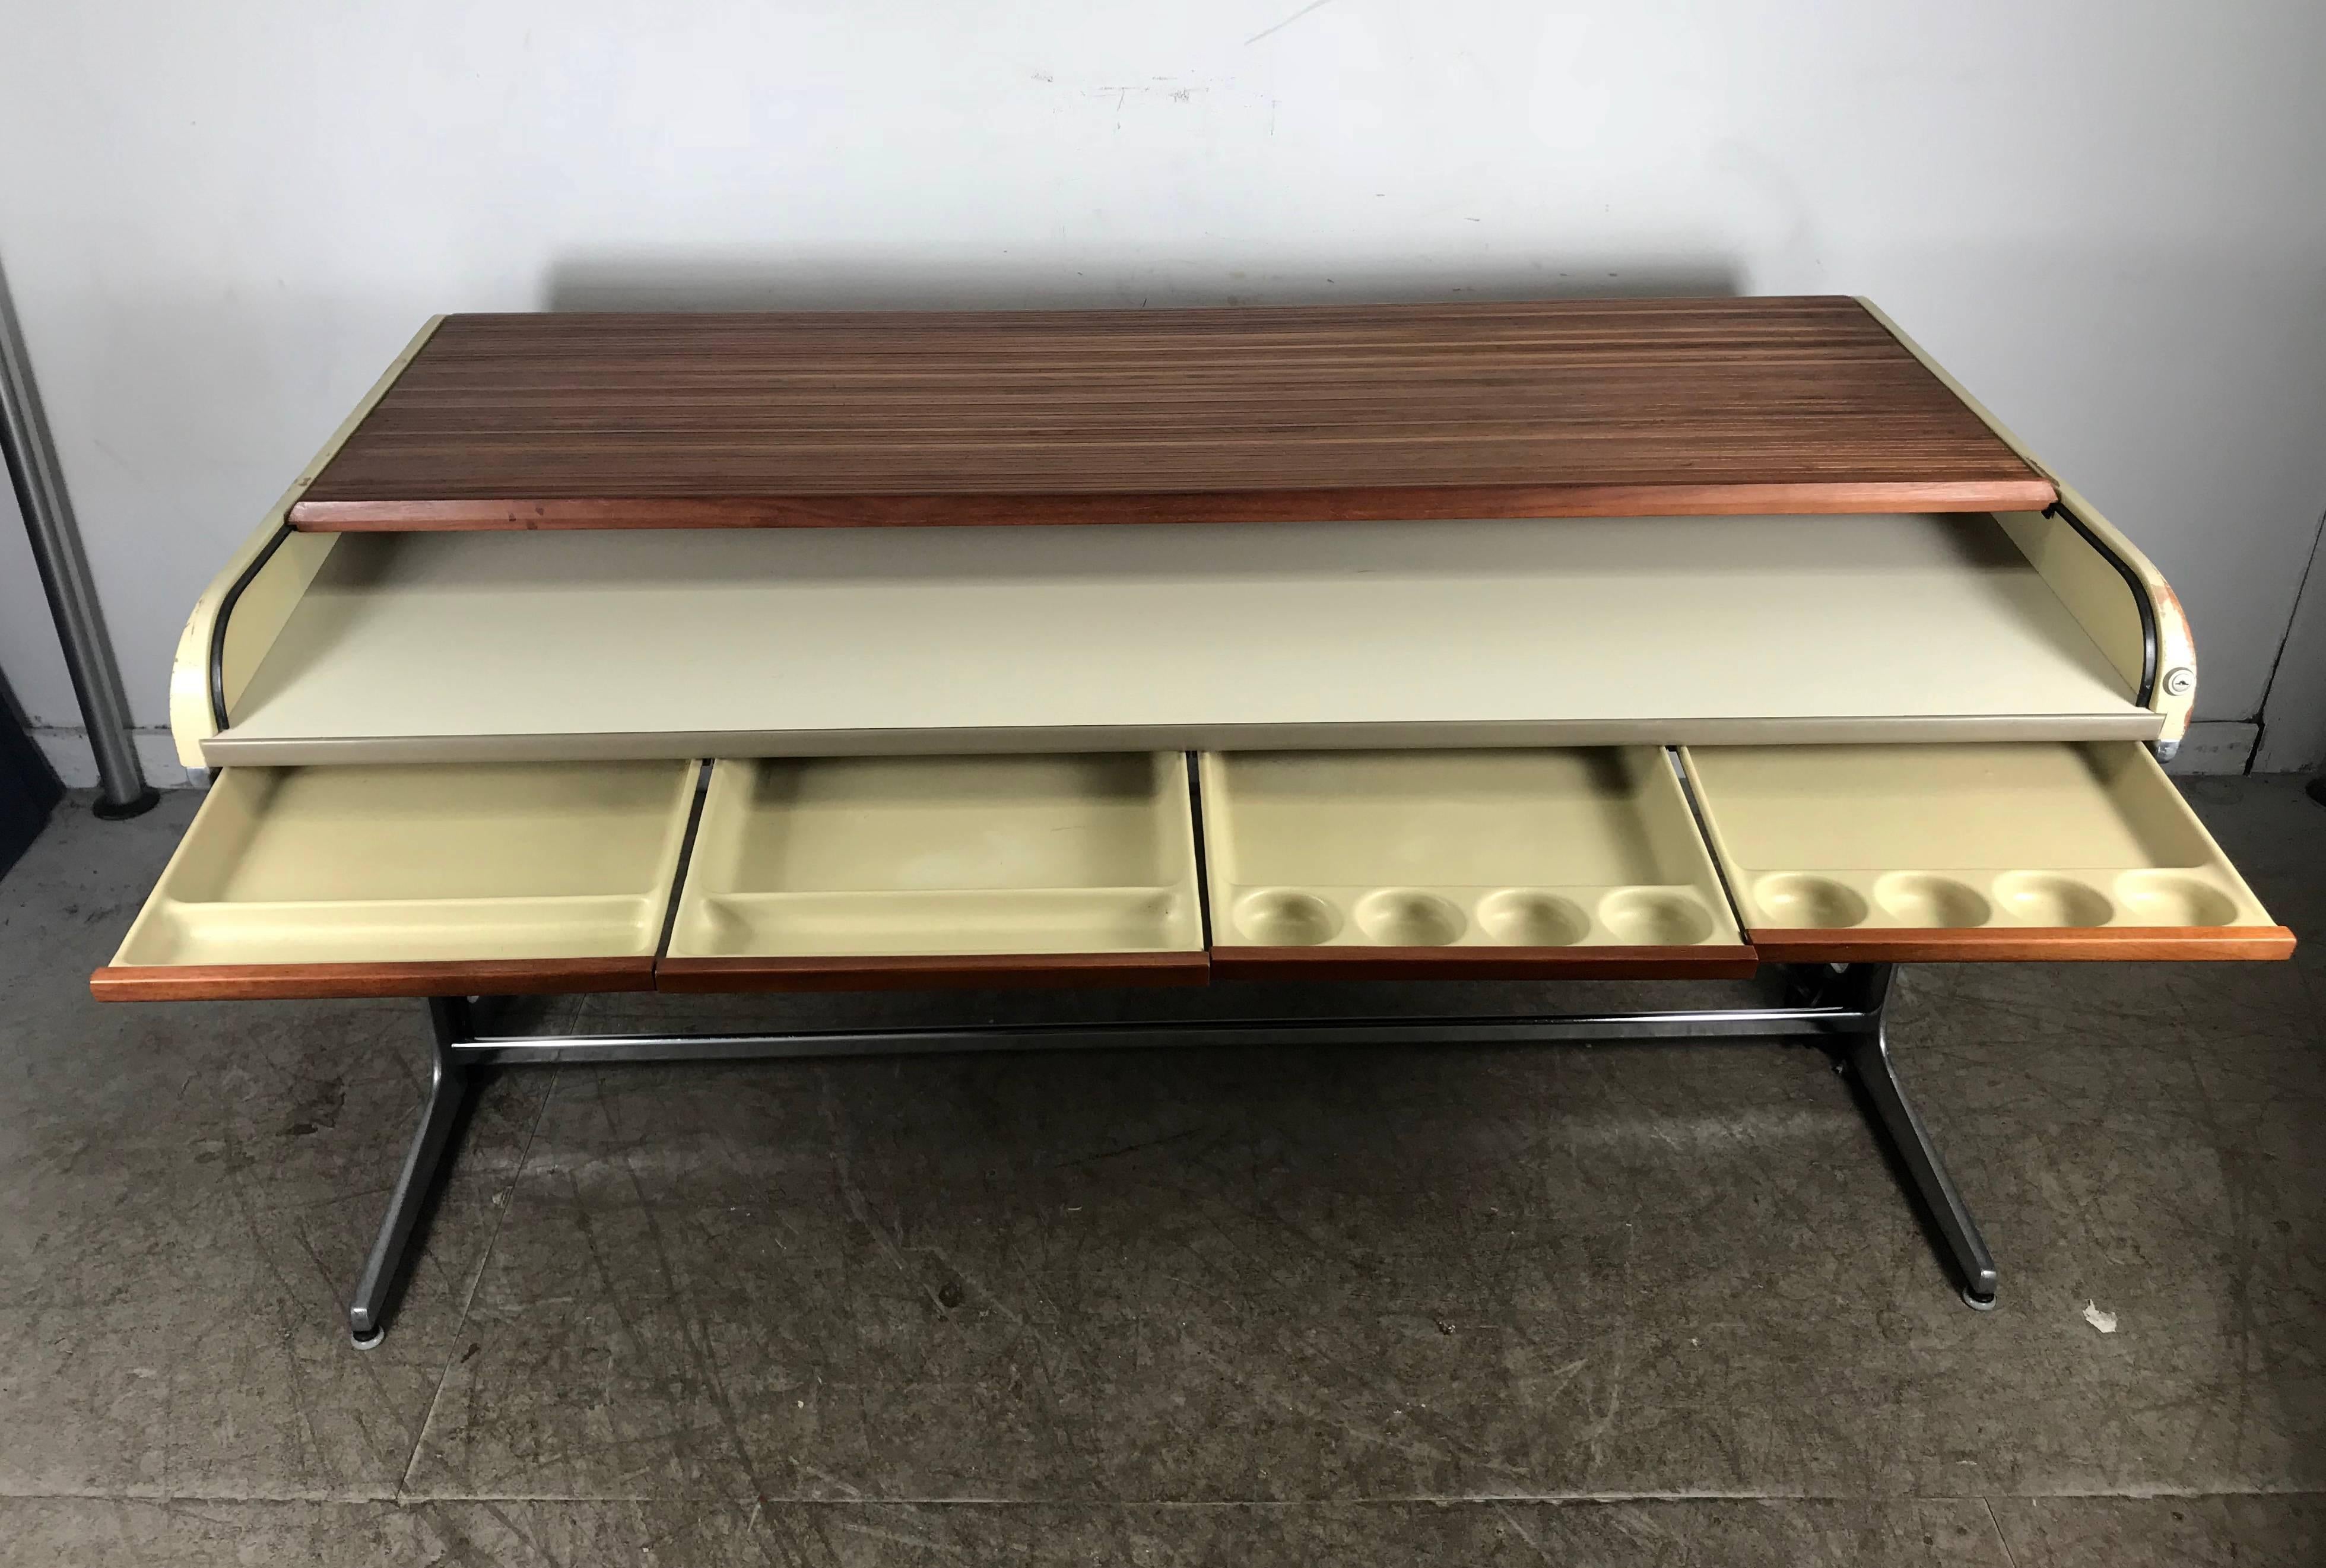 Early modernist George Nelson roll top desk. Purchased from prominent Buffalo New York architect, retains original cream lacquer wood finish, amazing original finish, warm rosewood tambour roll top, cast aluminum base. Hand delivery avail to New